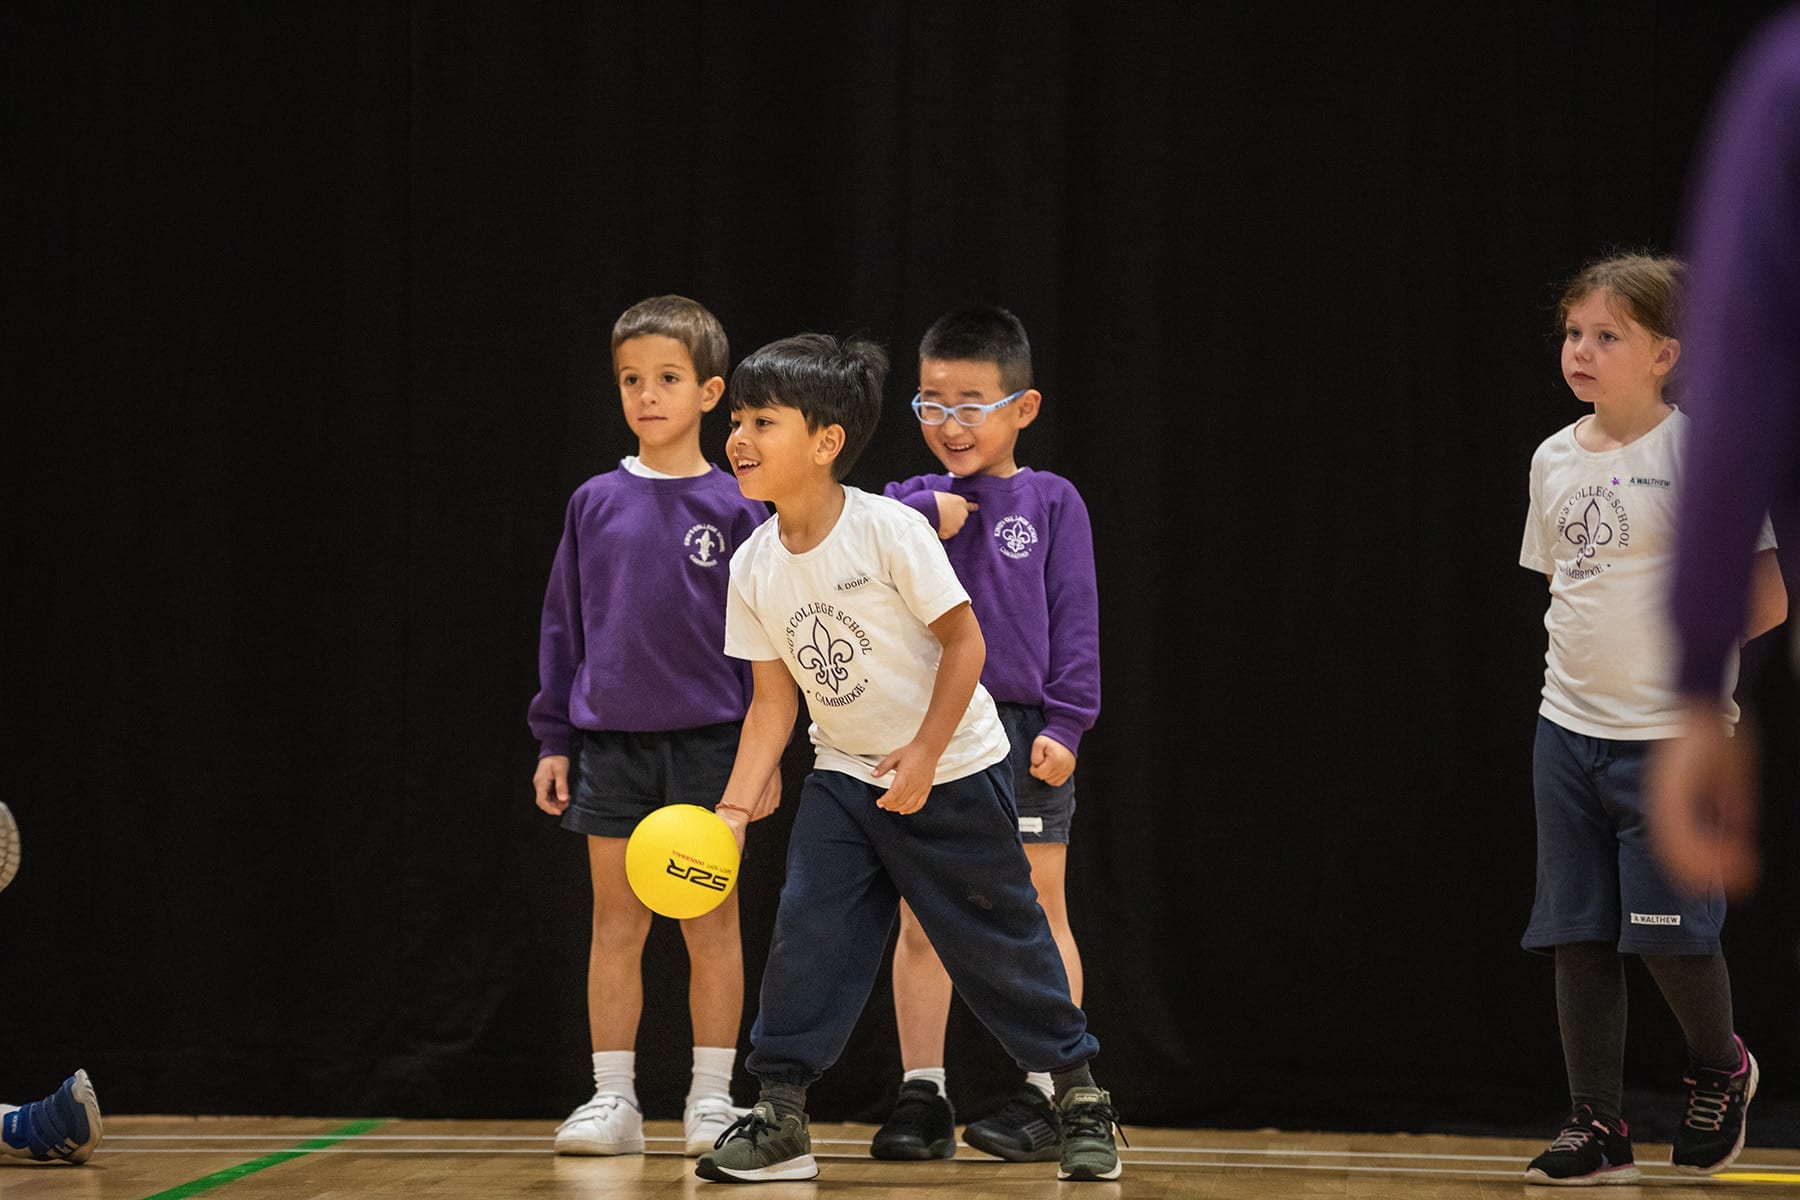 Pupils playing indoor sports